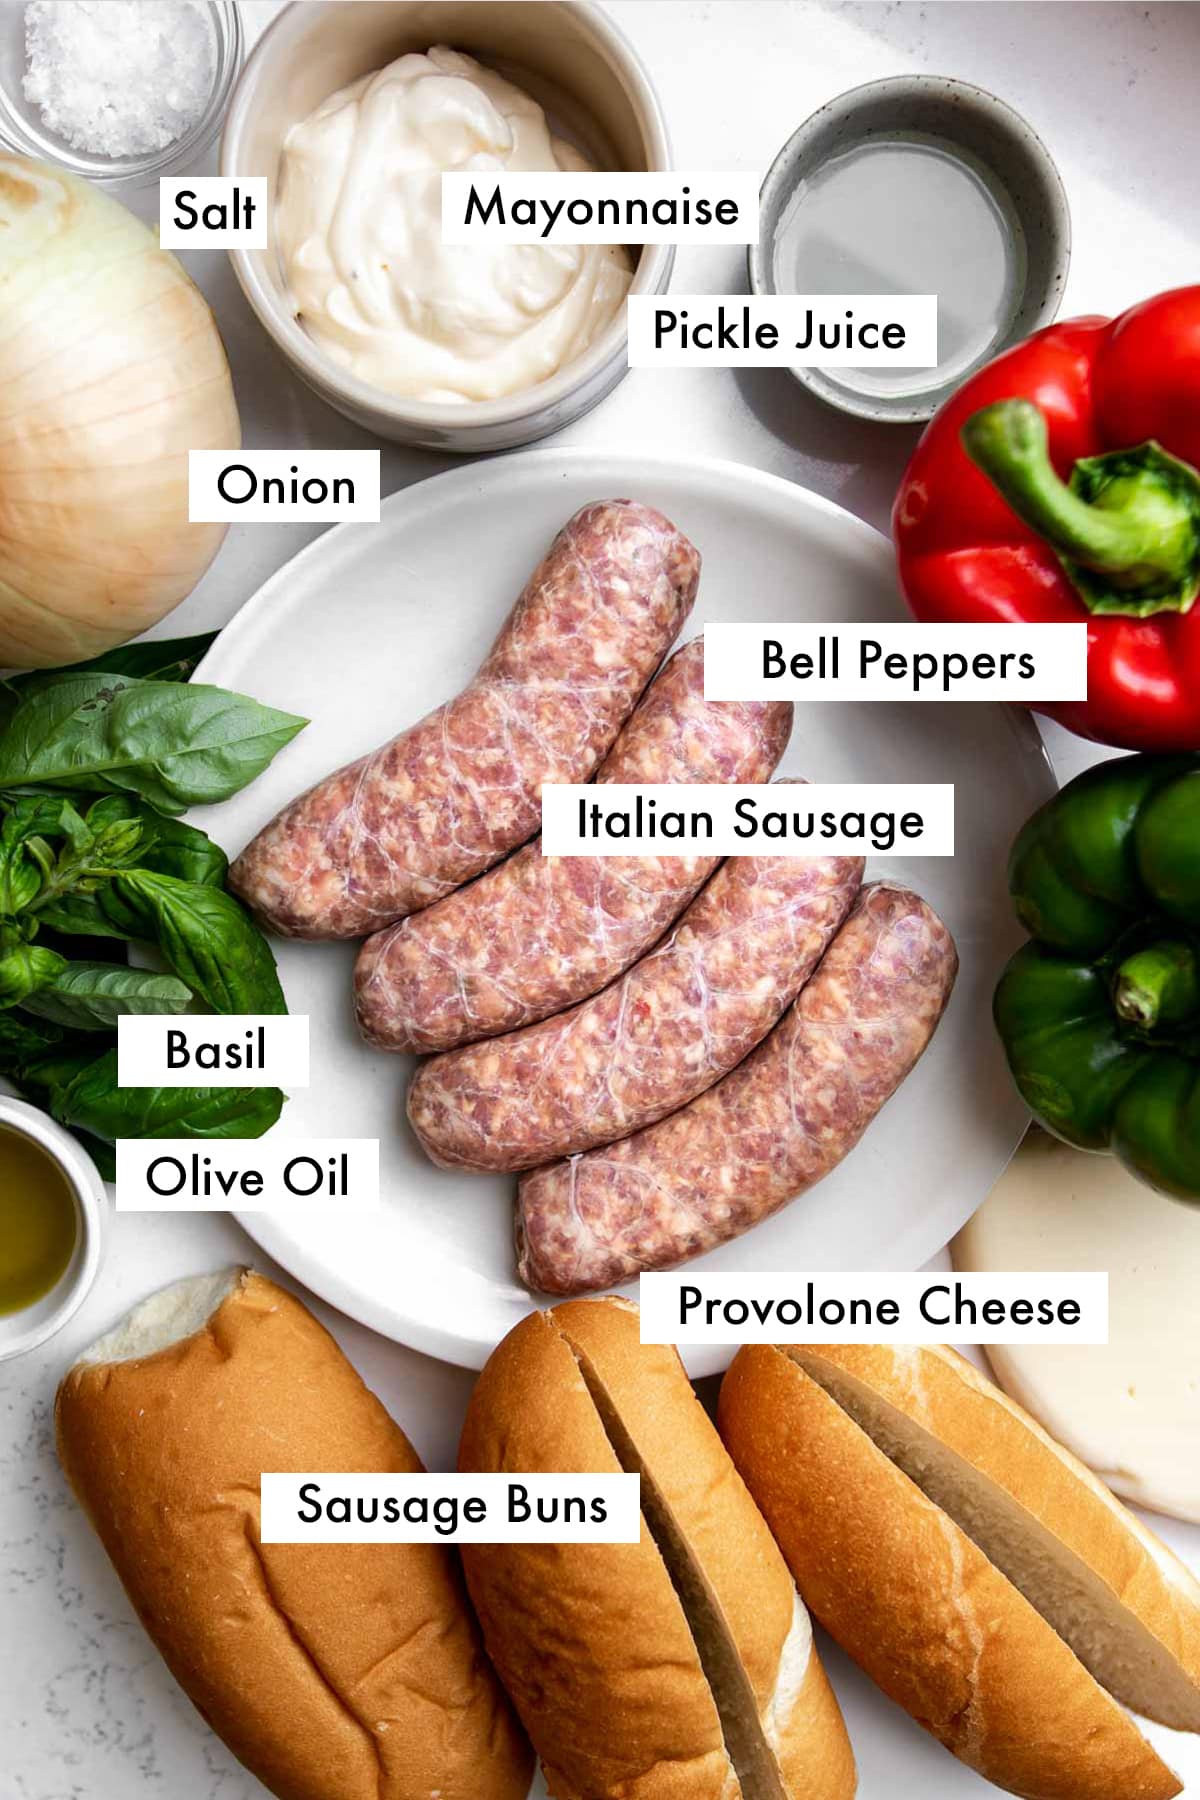 Small plate with 4 sausages, surrounded by 3 sausage buns, olive oil, fresh basil, garlic, onion, sea salt flakes, mayonnaise, pickle juice, red pepper, green pepper, and provolone cheese.